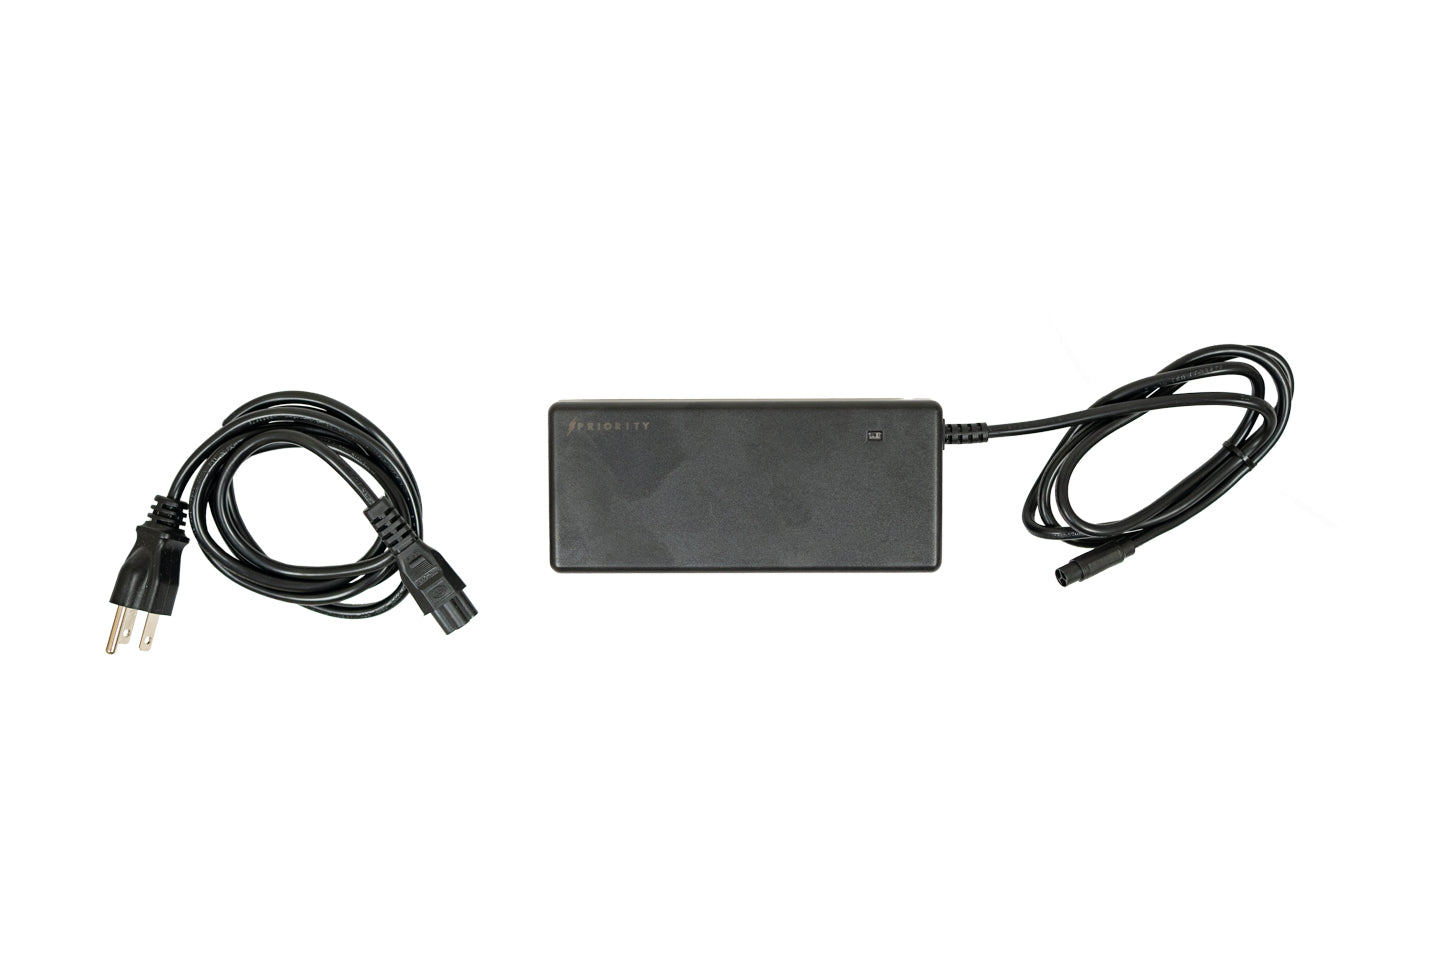 Priority Charger for Current e-bike